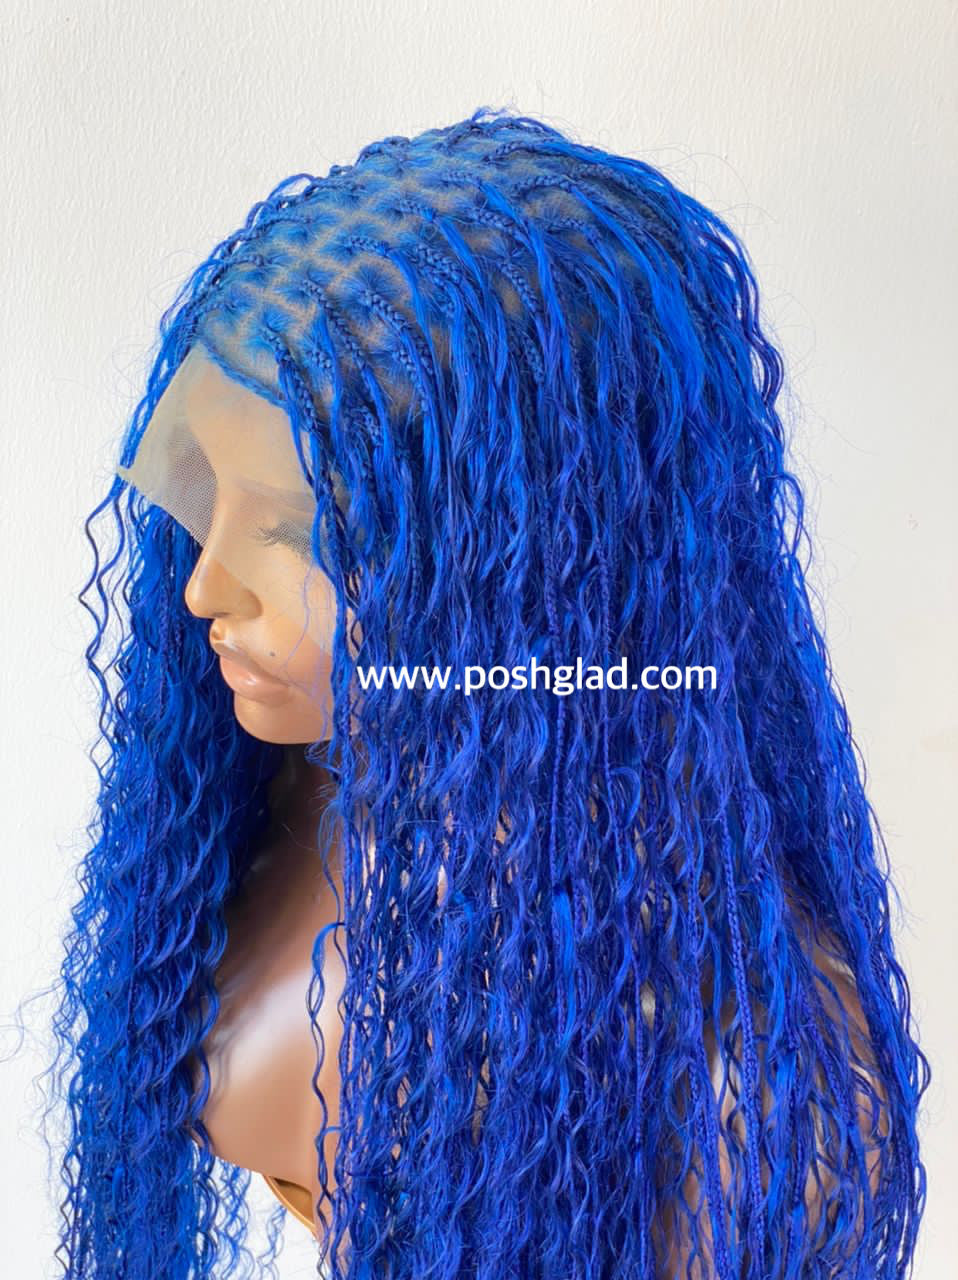 New Dark Blue Knotless Braid Wig Available on Full Lace Wig